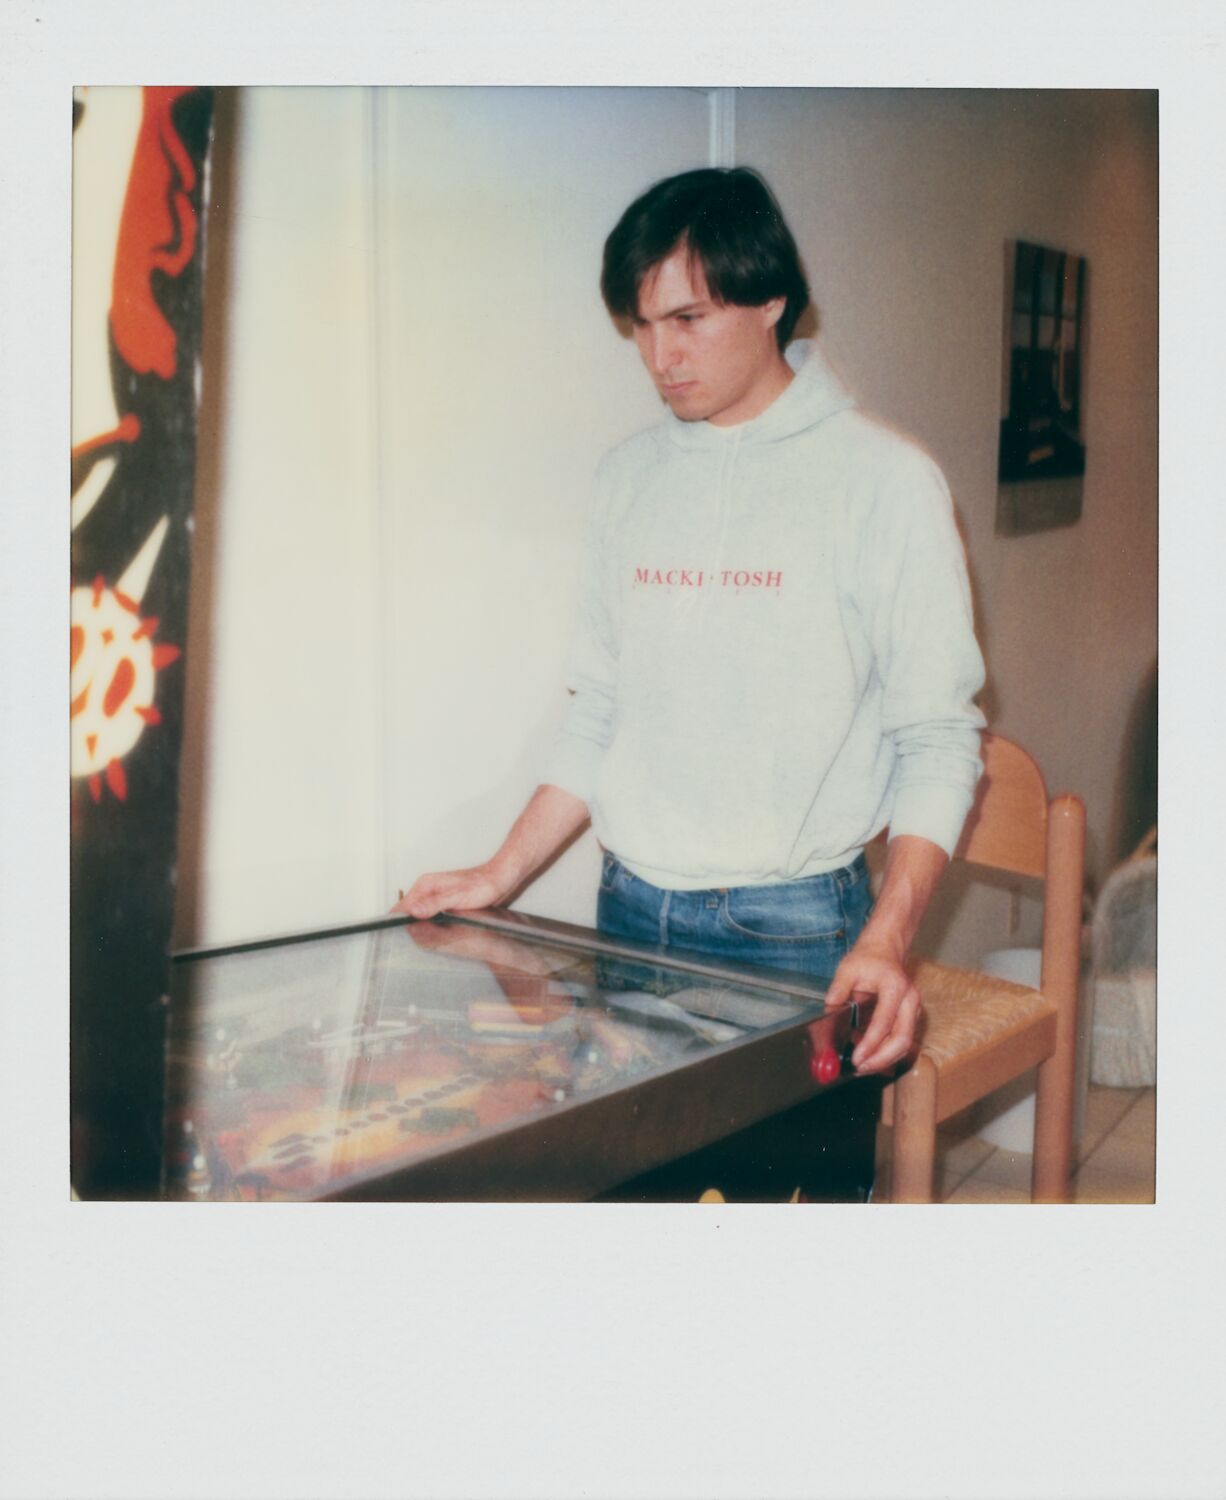 A Polaroid of Steve, playing pinball, with a white hooded sweatshirt with the word Mackintosh on the chest.